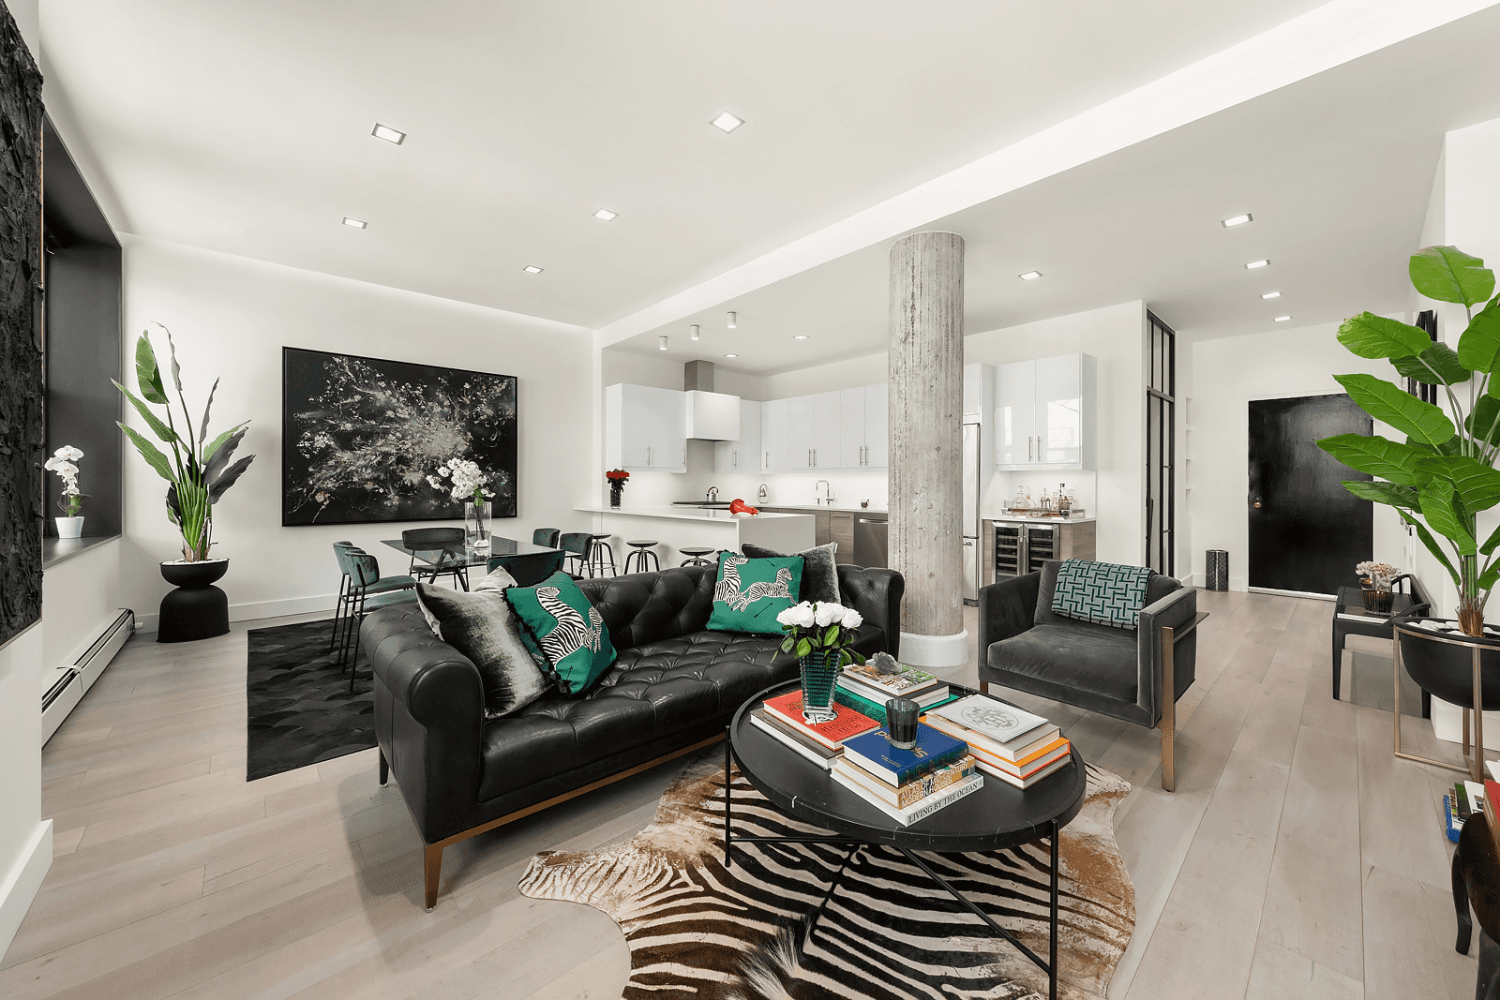 Just Listed ! Triple Mint Renovated Ultra Chic Spacious One Bedroom Loft Plus Home Office Guest Bedroom amp ; Two Baths on a High floor in a Doorman building in ...